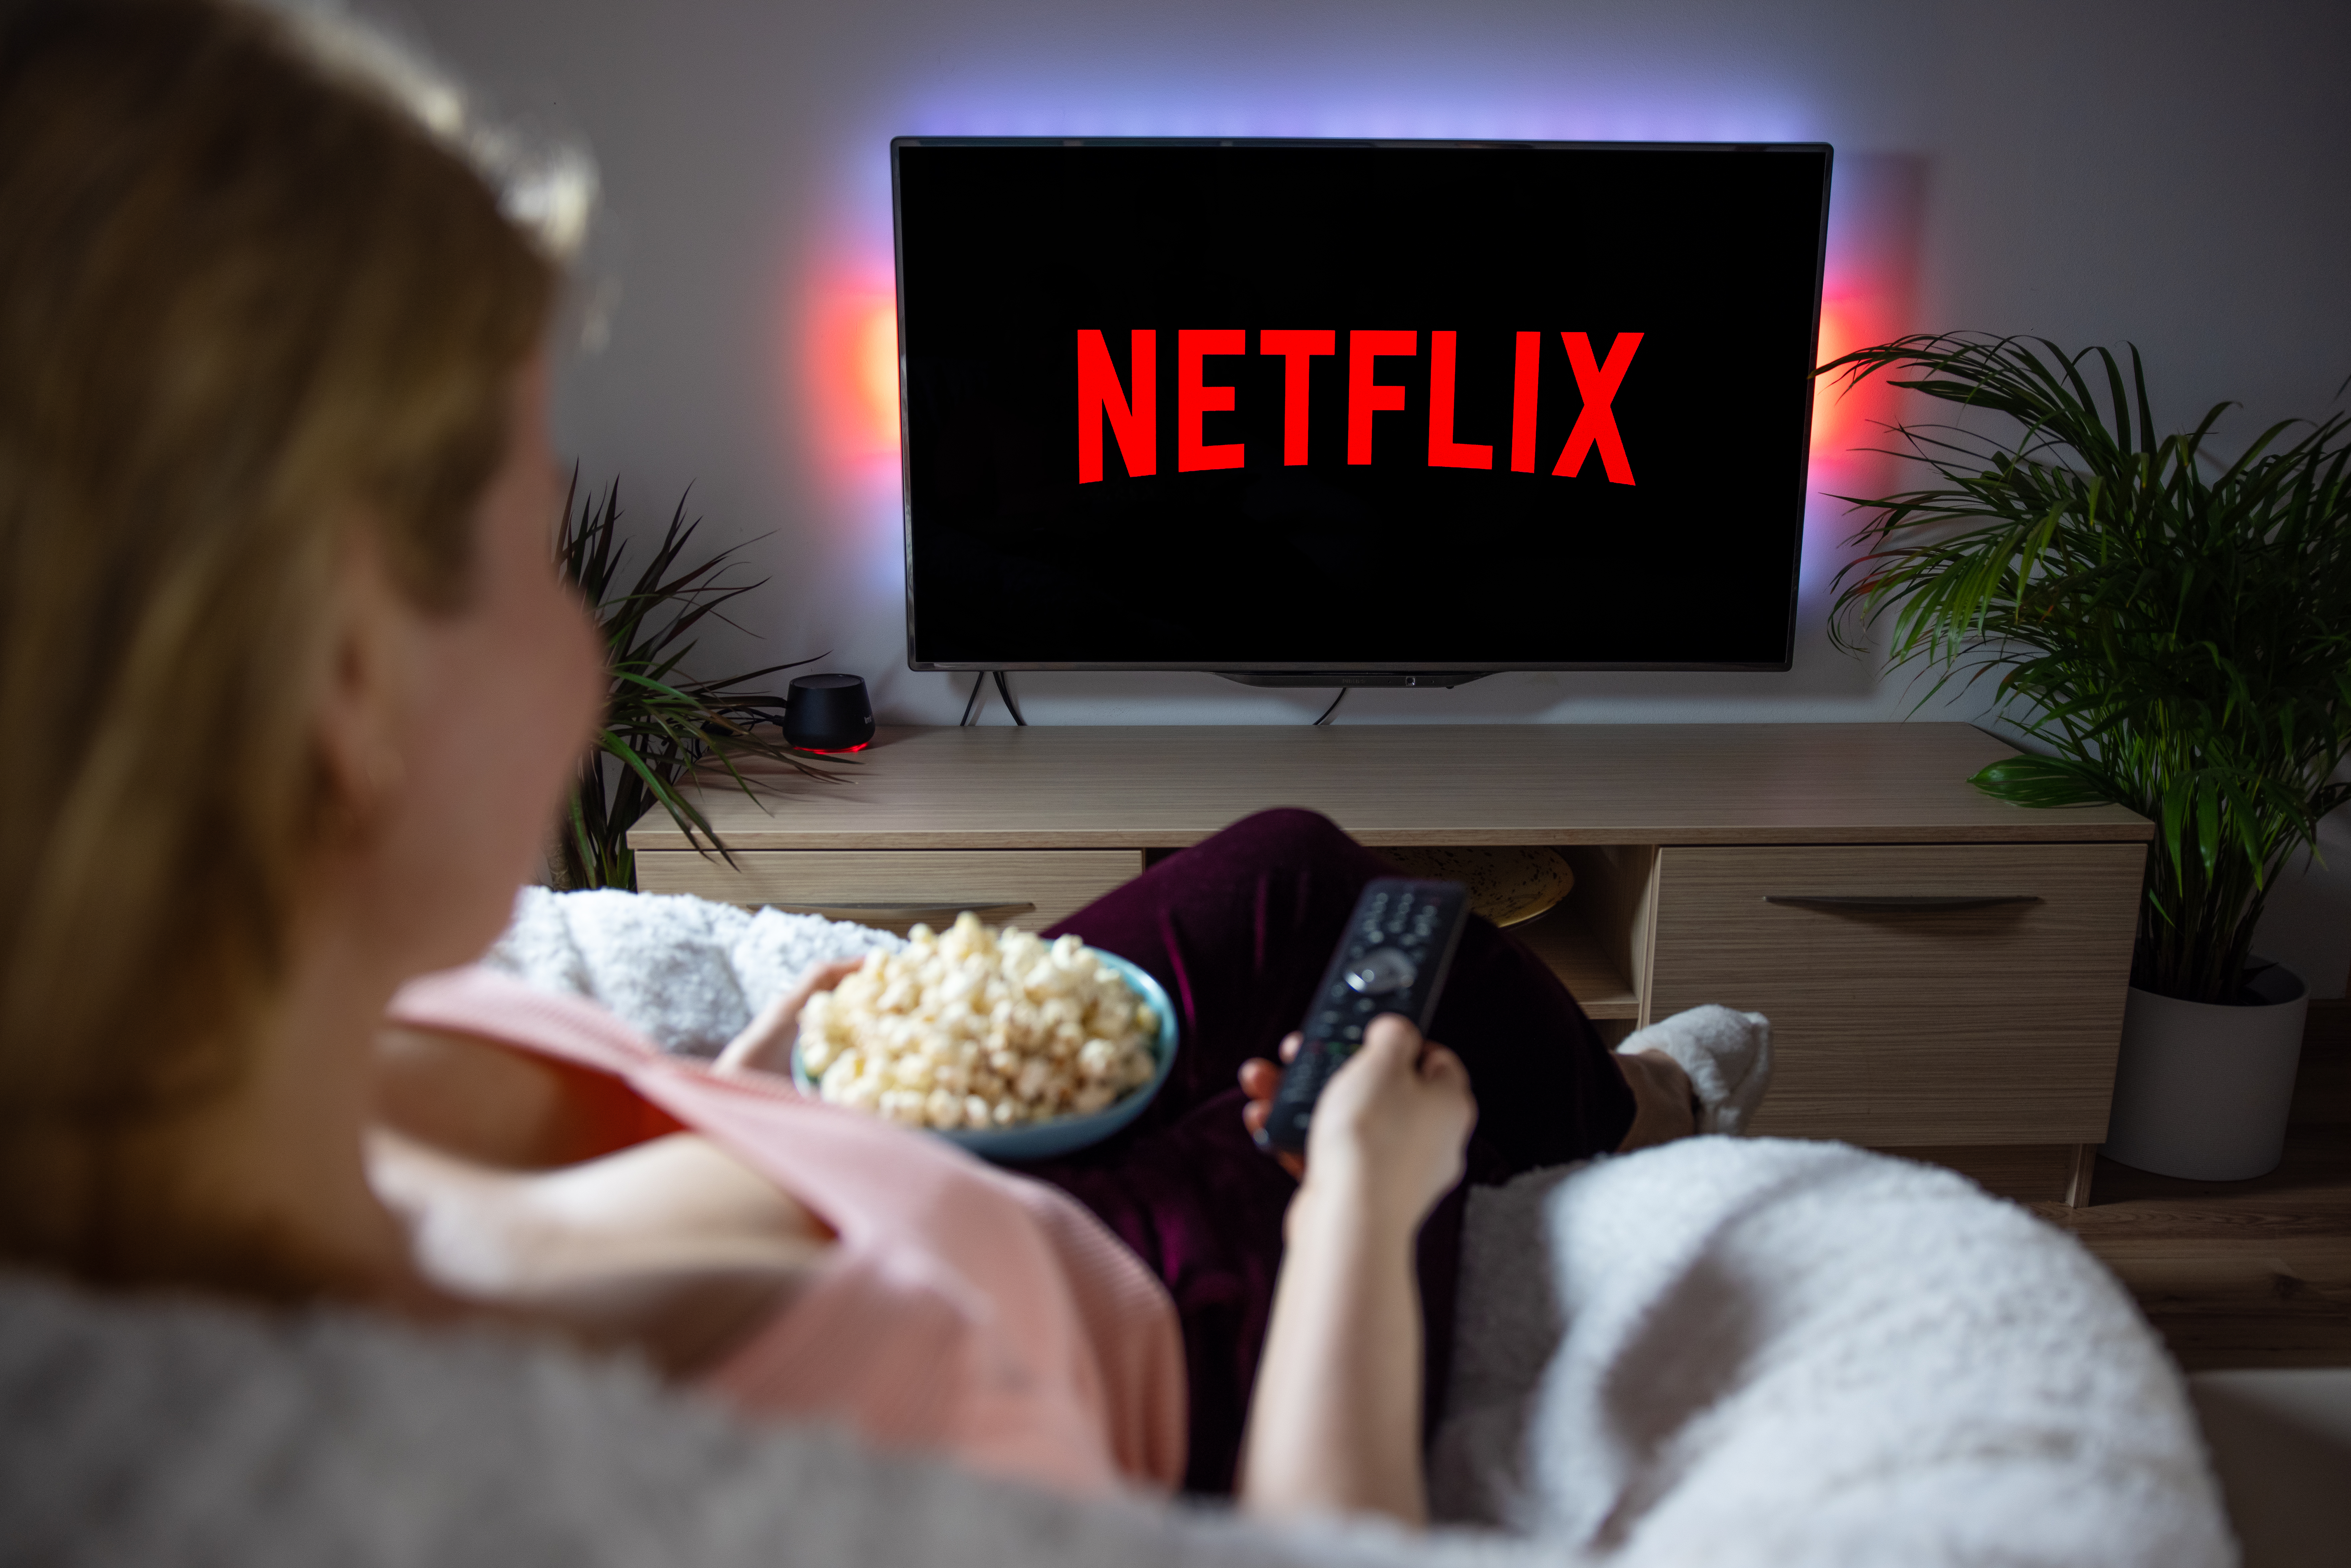 Woman sitting on the couch eating popcorn and watching Netflix